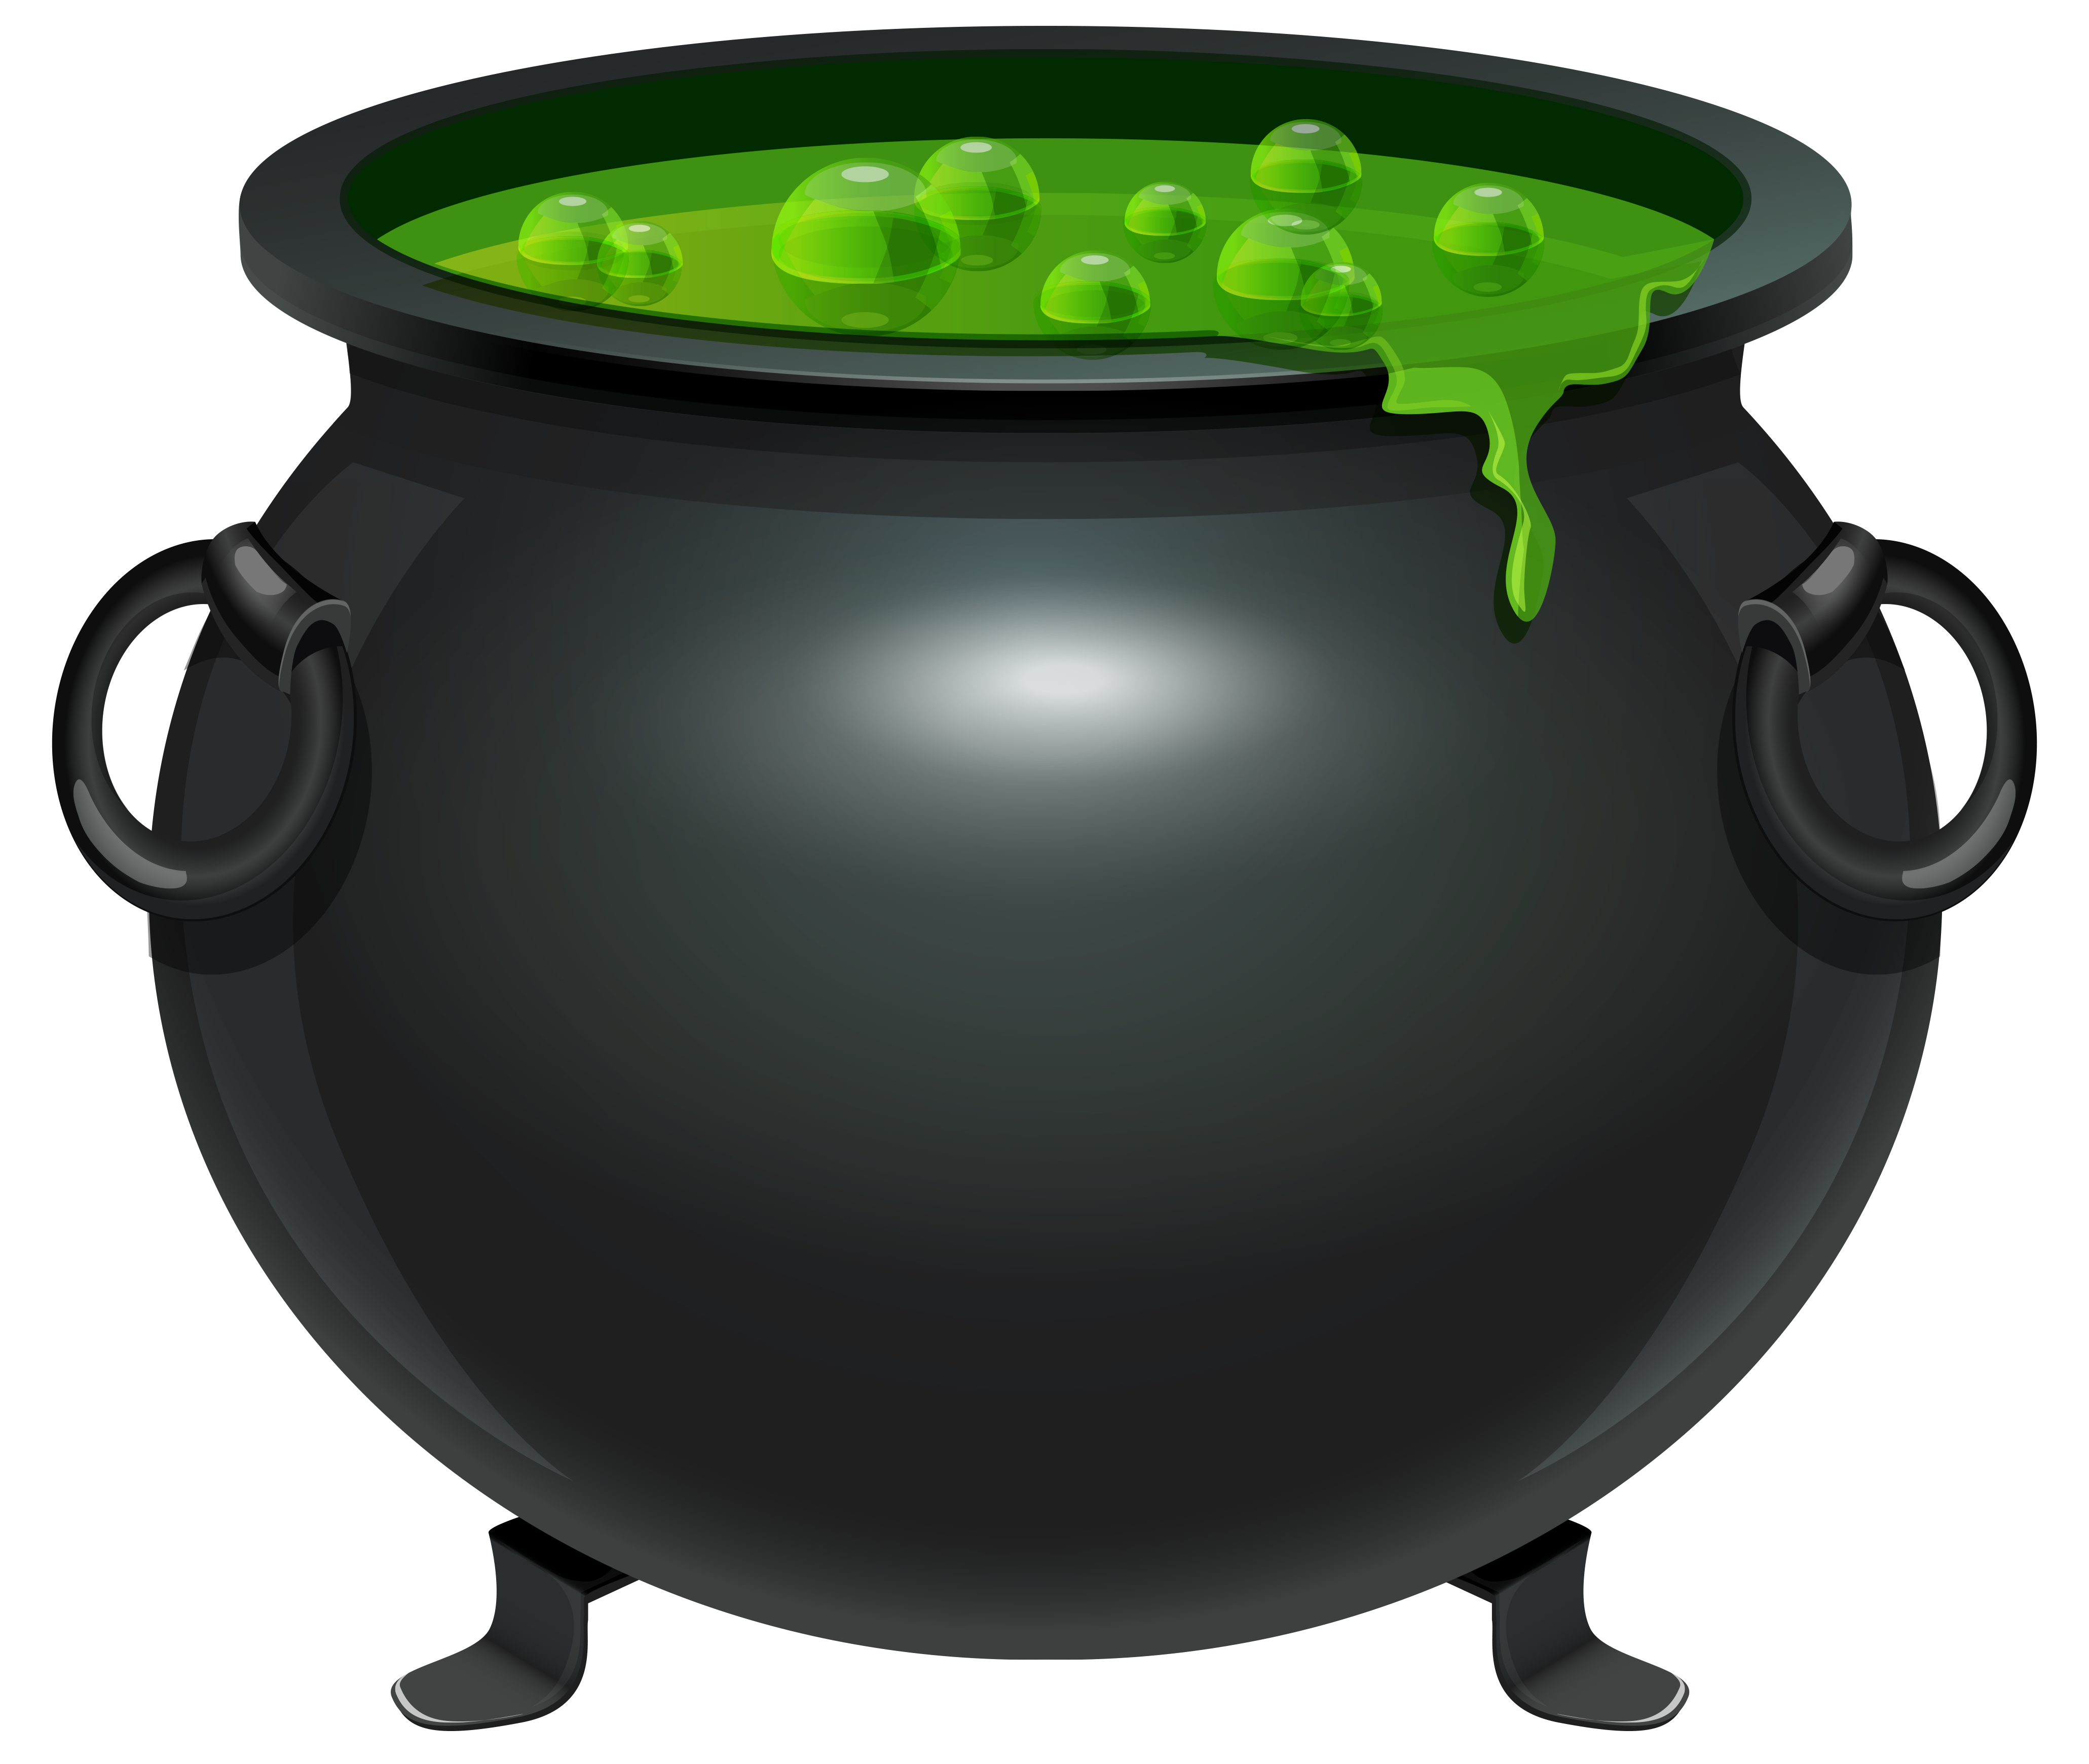 Top 70 of Witches Cauldron Clipart specialsonjvclt42x68855158